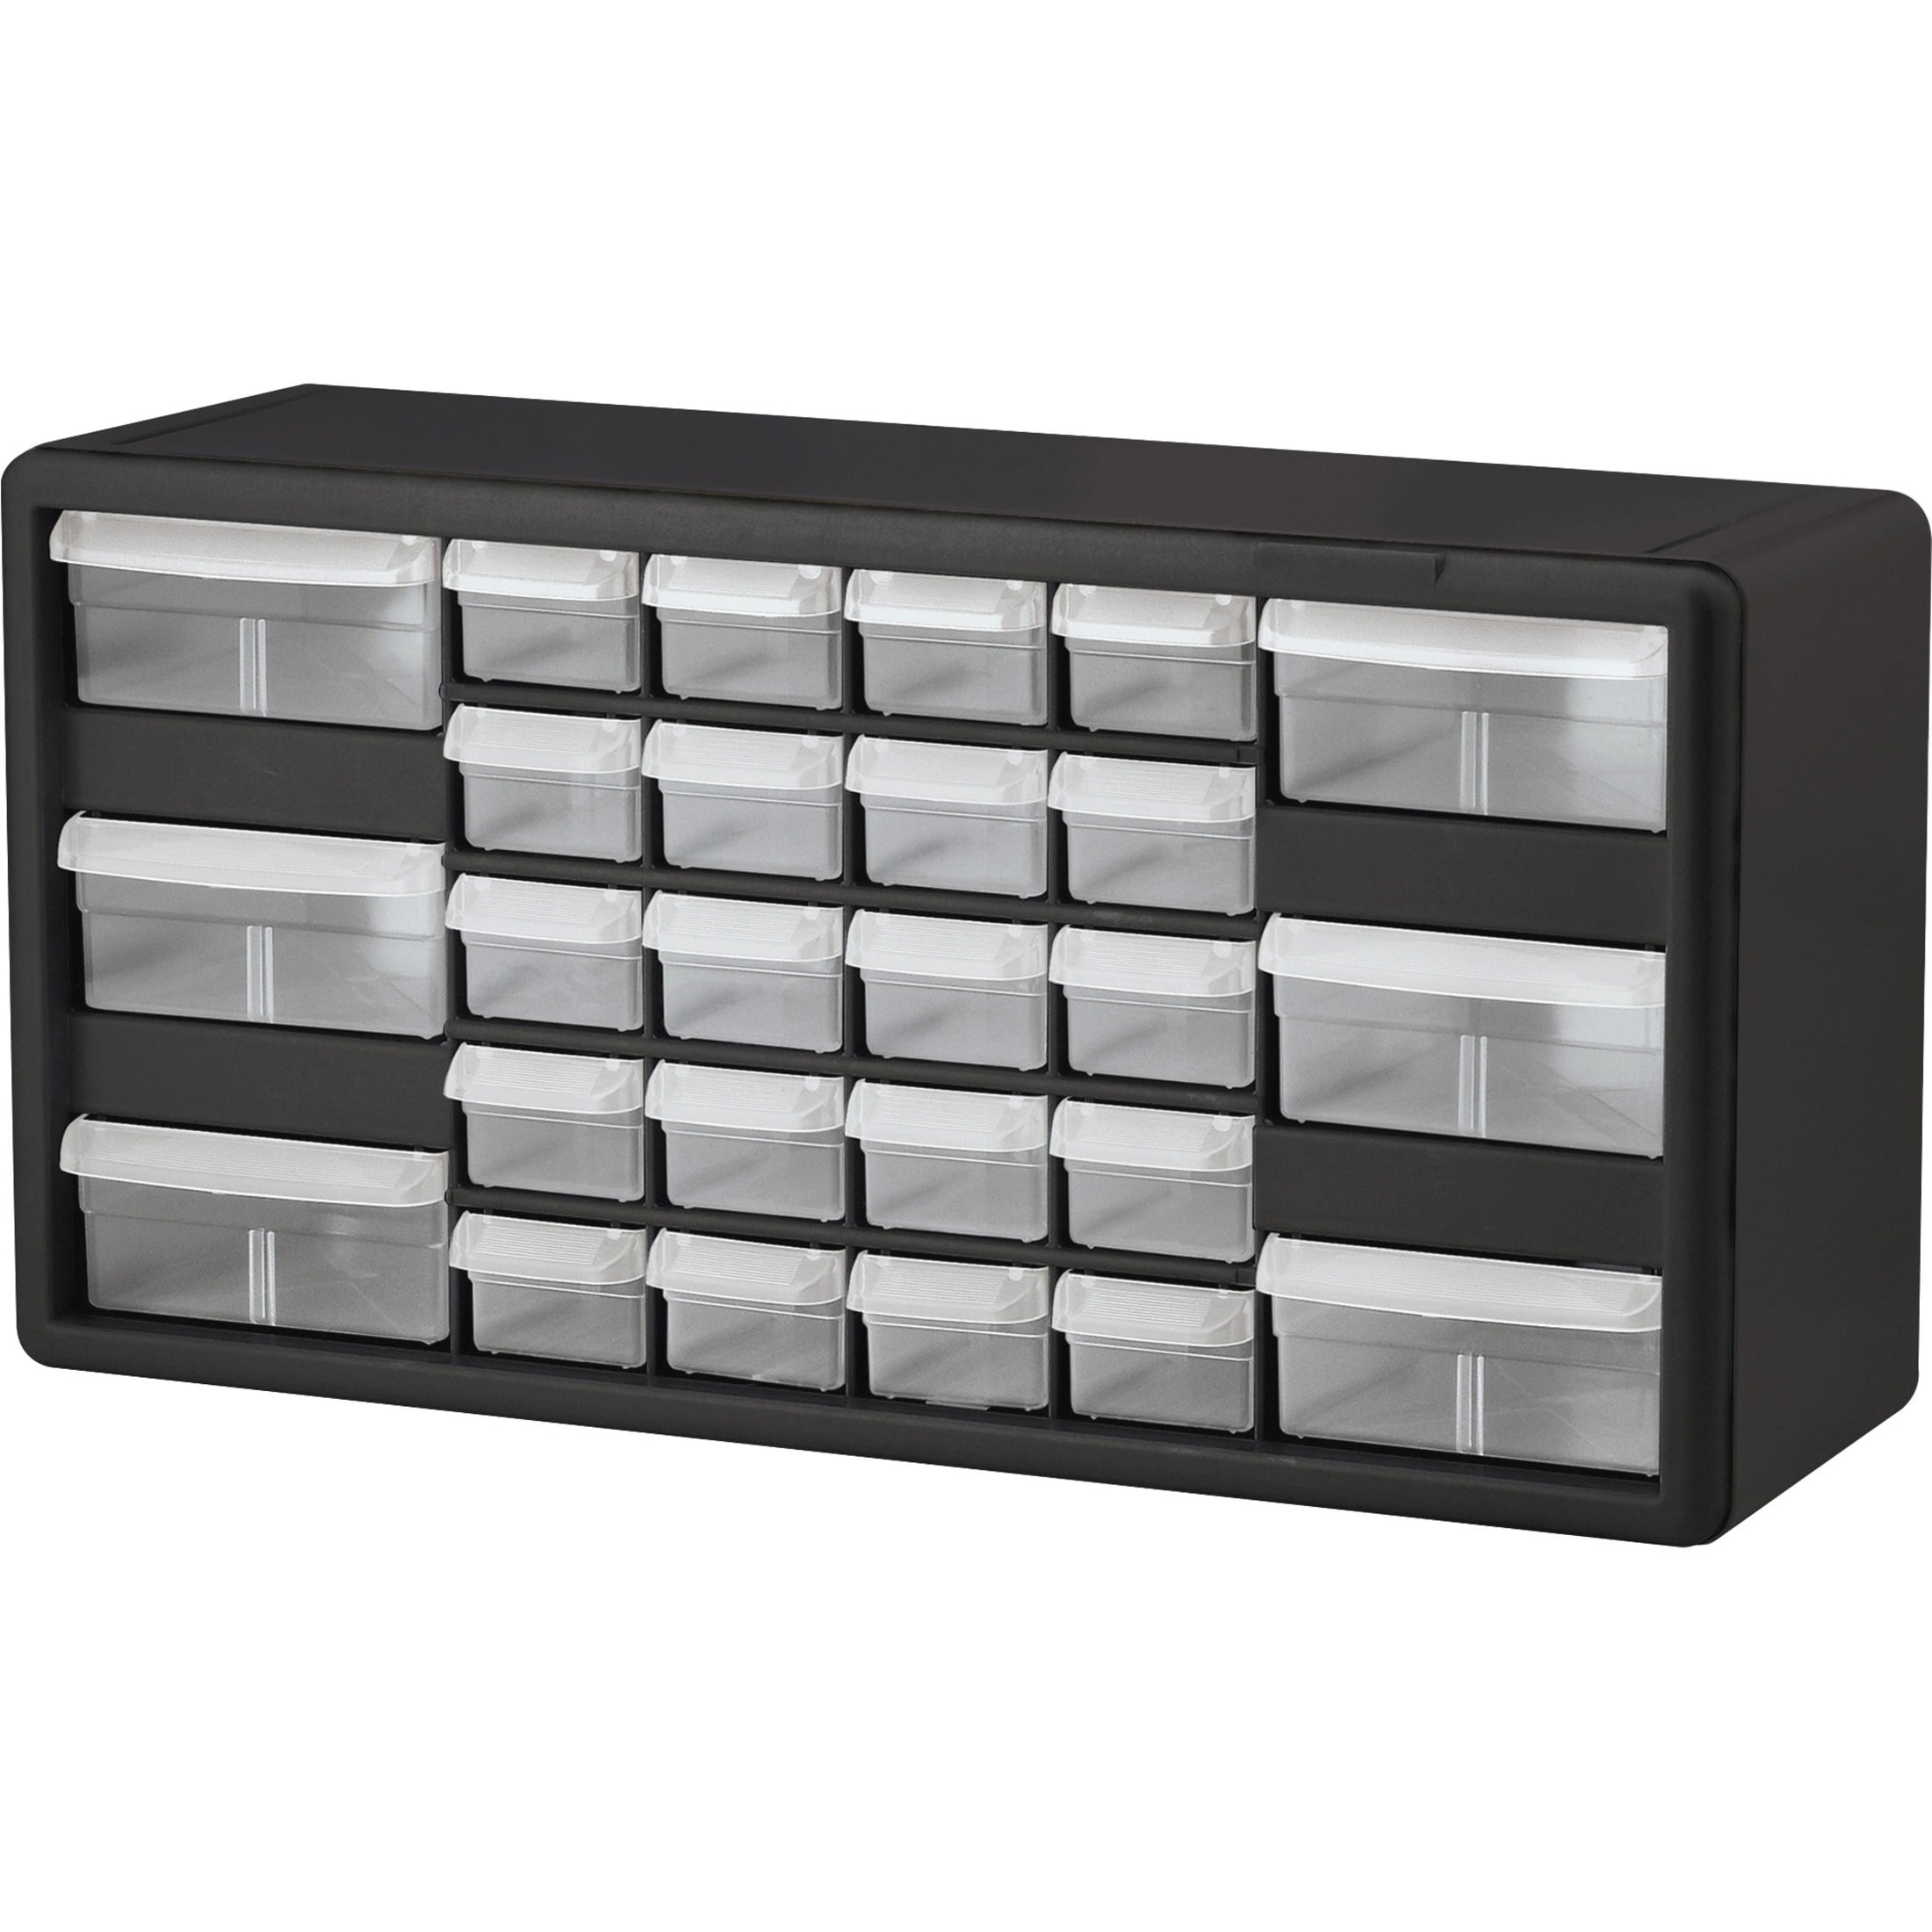 Nuts And Bolts Organizer Small Hardware Storage With Unbreakable Drawers Garage 